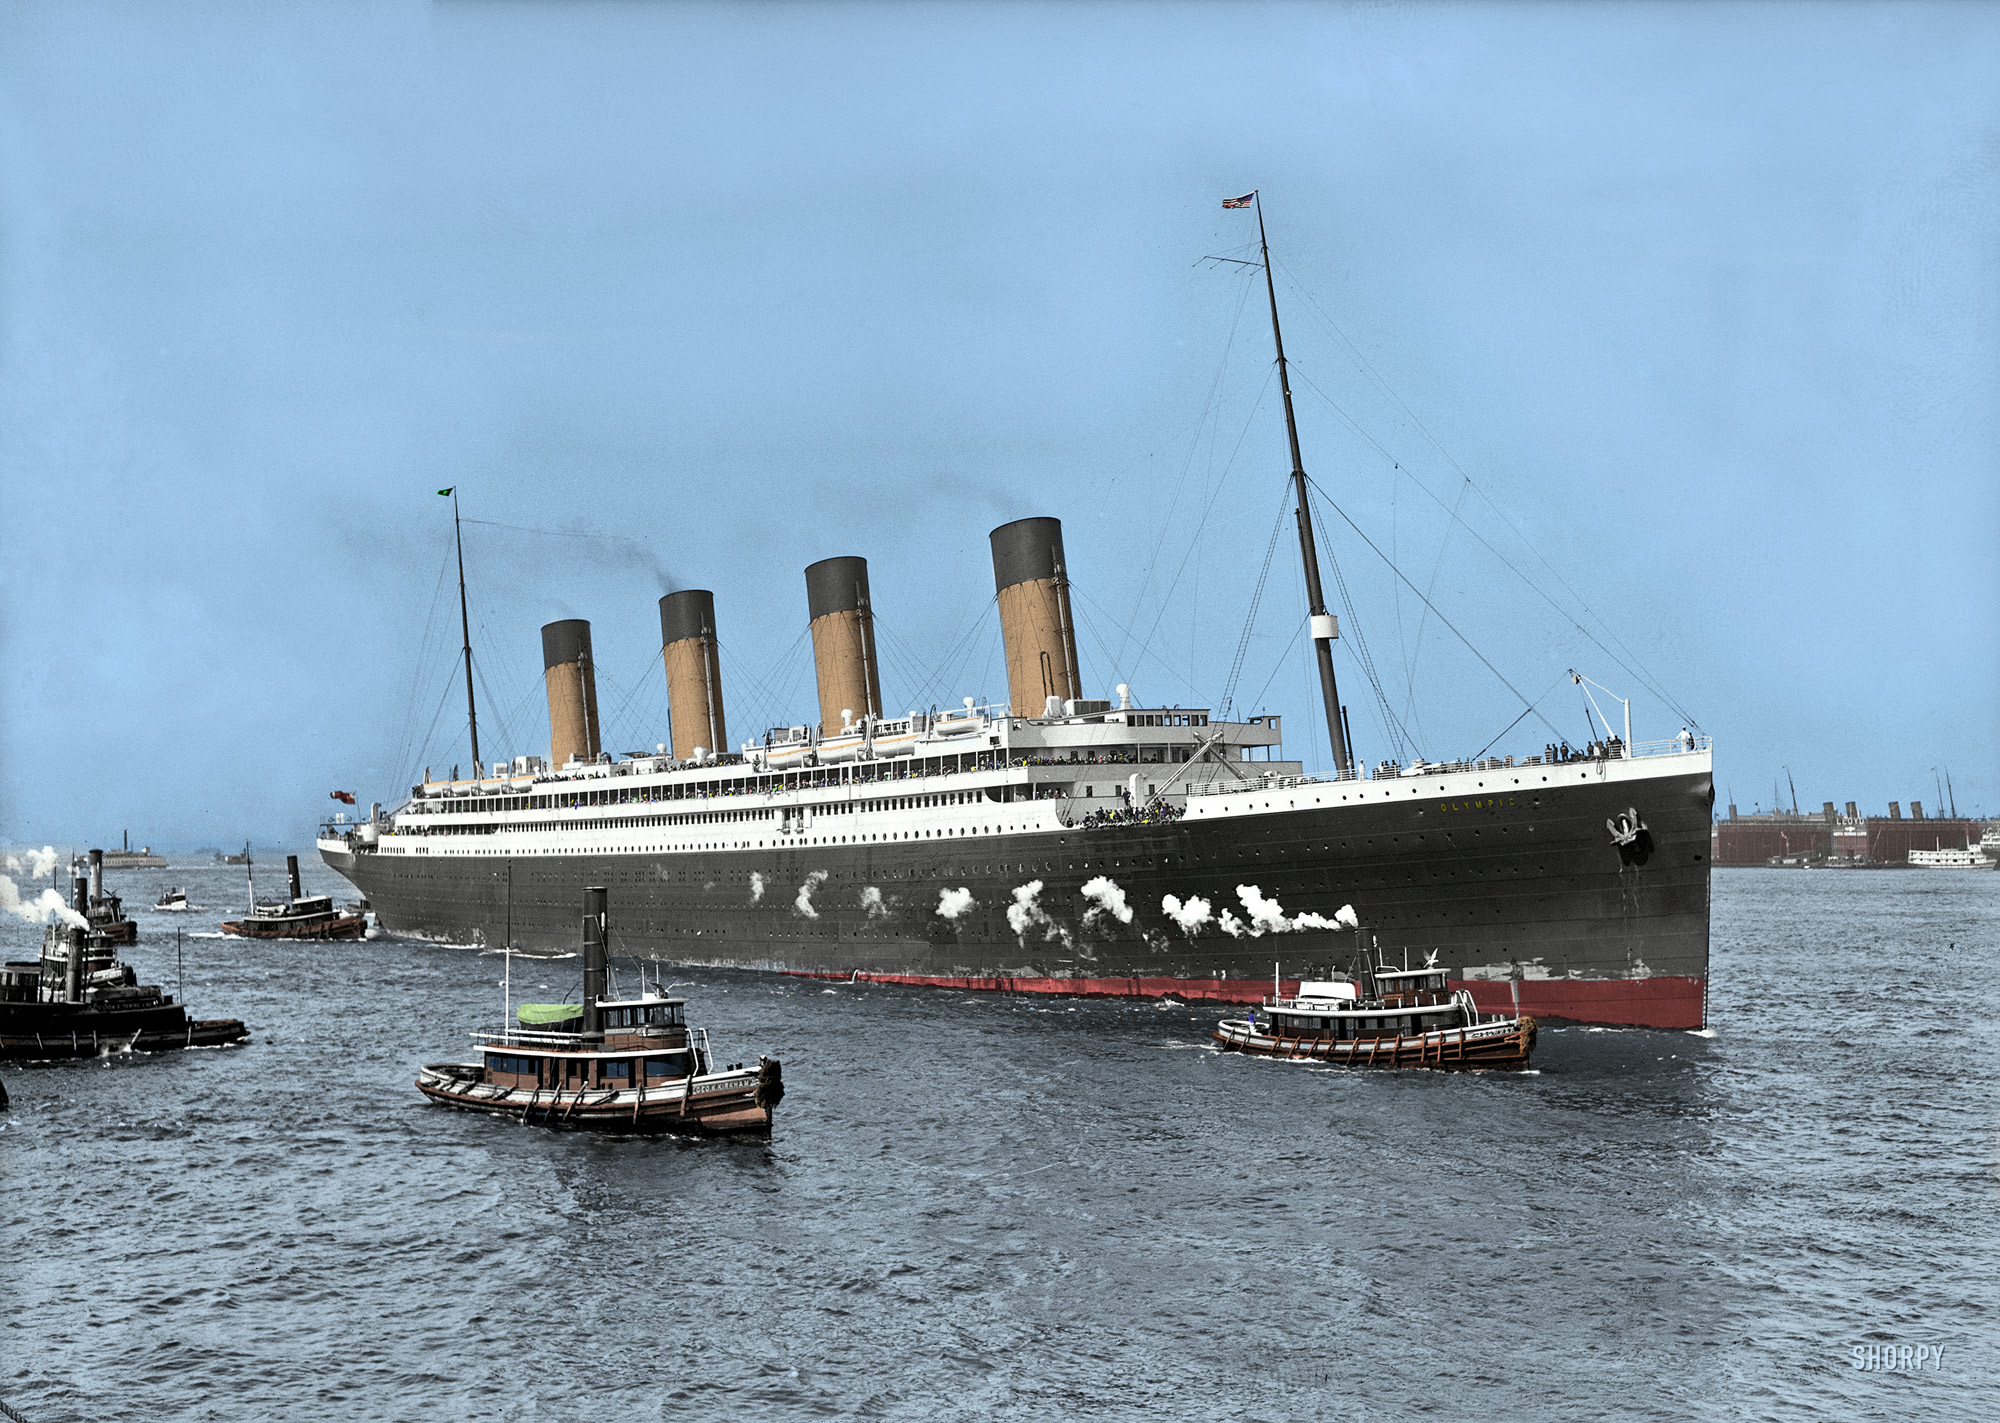 New York June 21, 1911. I look at this and just see what the Titanic would have looked like whe she arrived in New York in April 1912. Very nice clear picture Shorpy!! I hope you enjoy this as much as me. View full size.